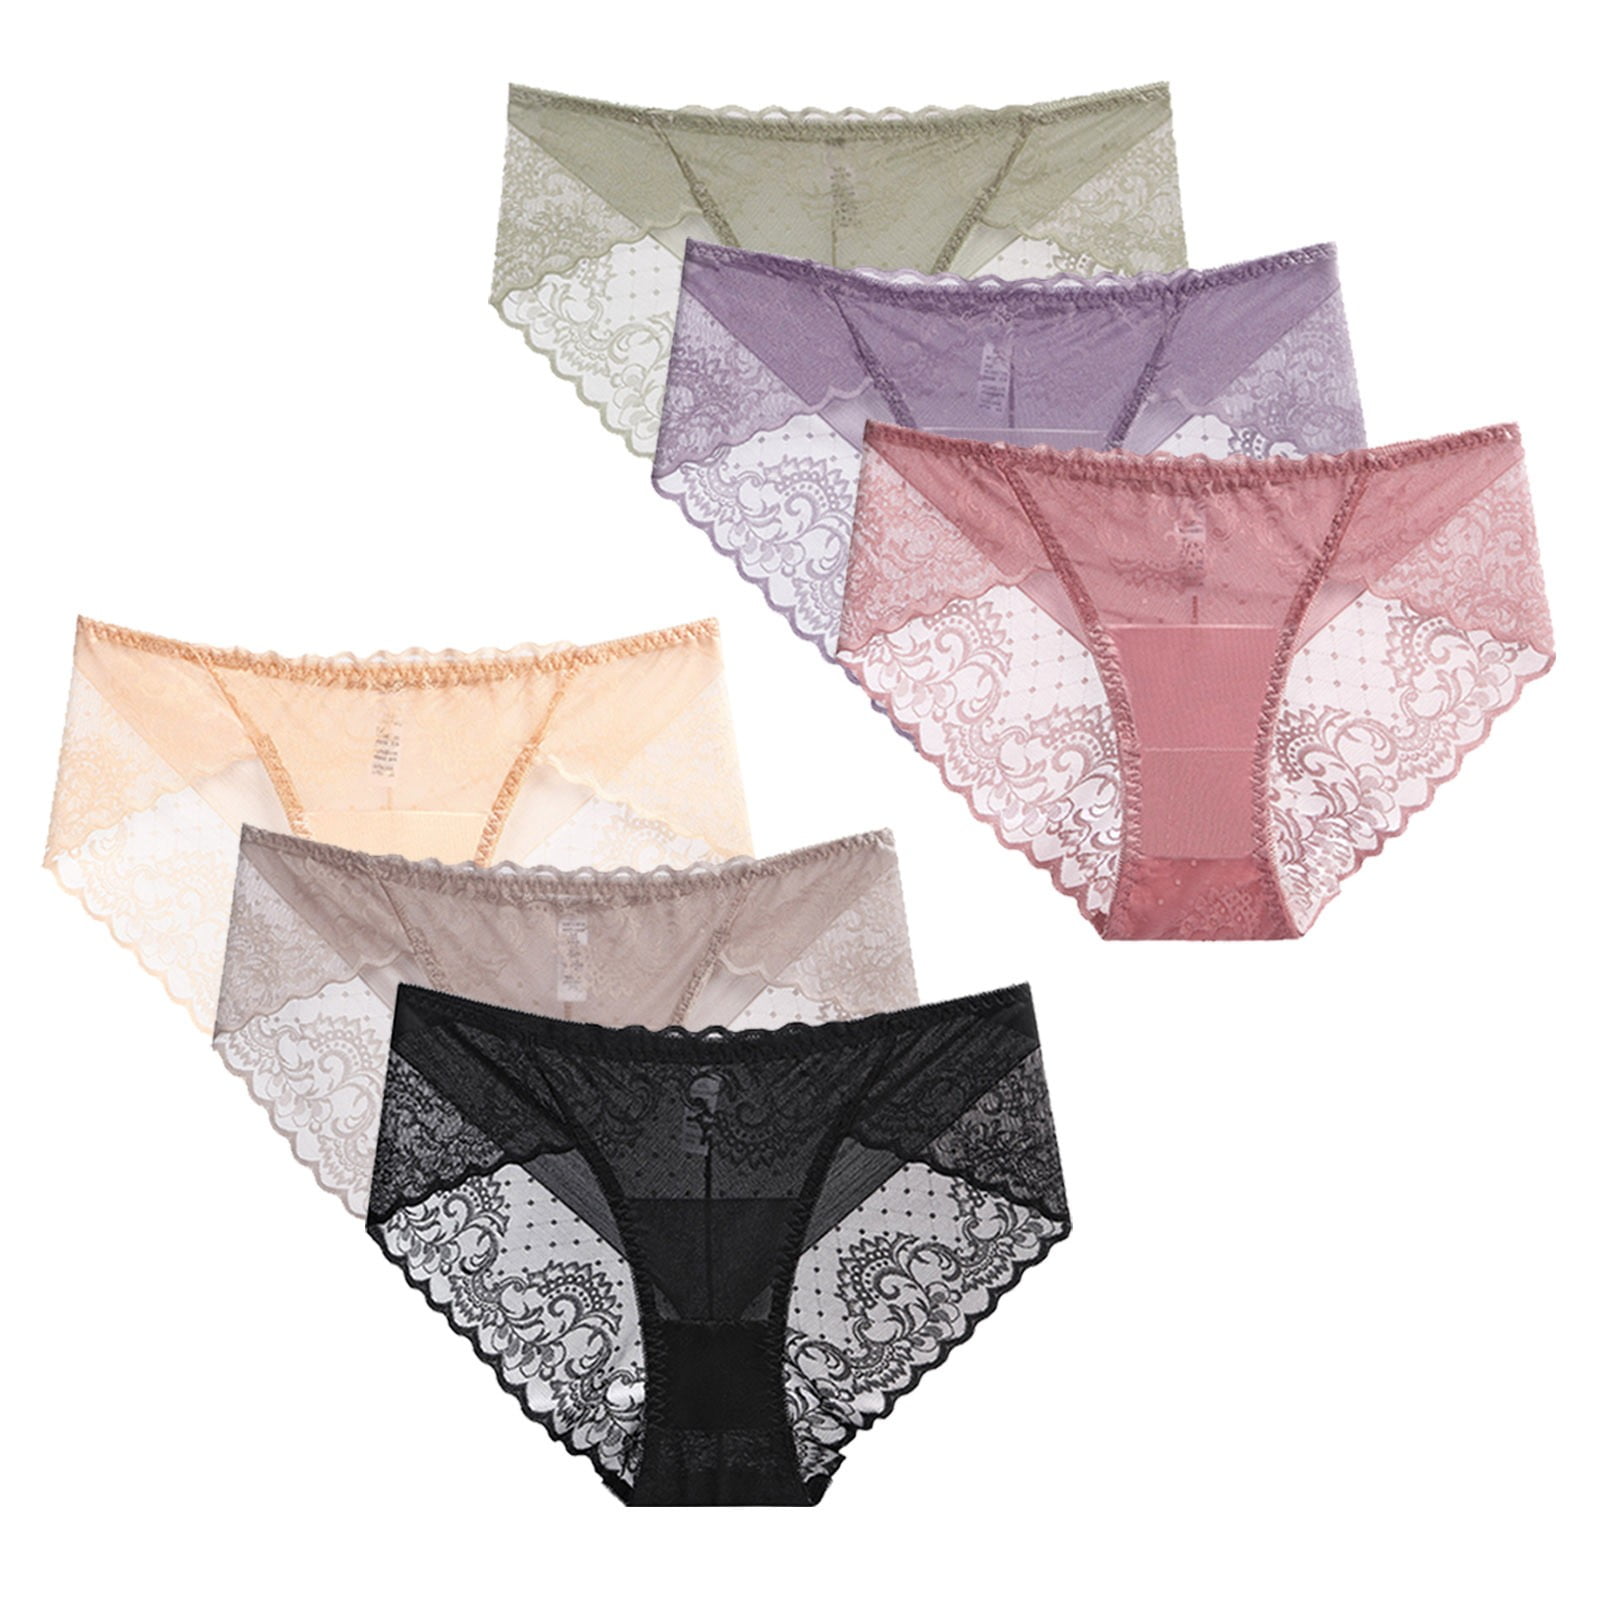 Buy Mature Ladies Lace Sexy Transparent One Piece Seamless Panties Underwear  from Shantou Quansheng Industrial Co., Ltd., China